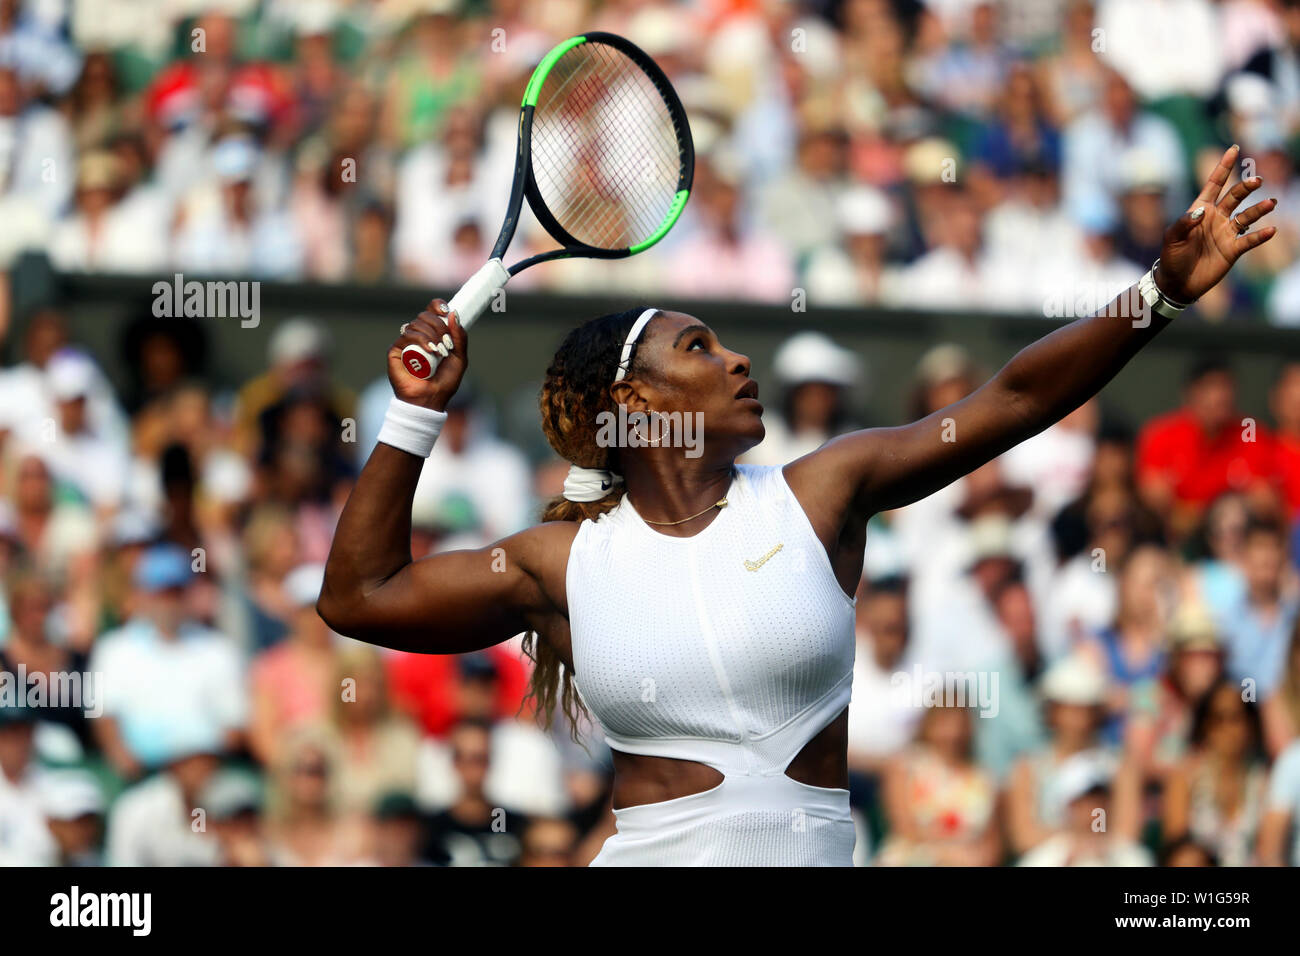 London, UK. 02nd July, 2019. Wimbledon, 2 July 2019 - Serena Williams in action during her first round victory over Giulia Gato-Monticone of Italy. Credit: Adam Stoltman/Alamy Live News Stock Photo